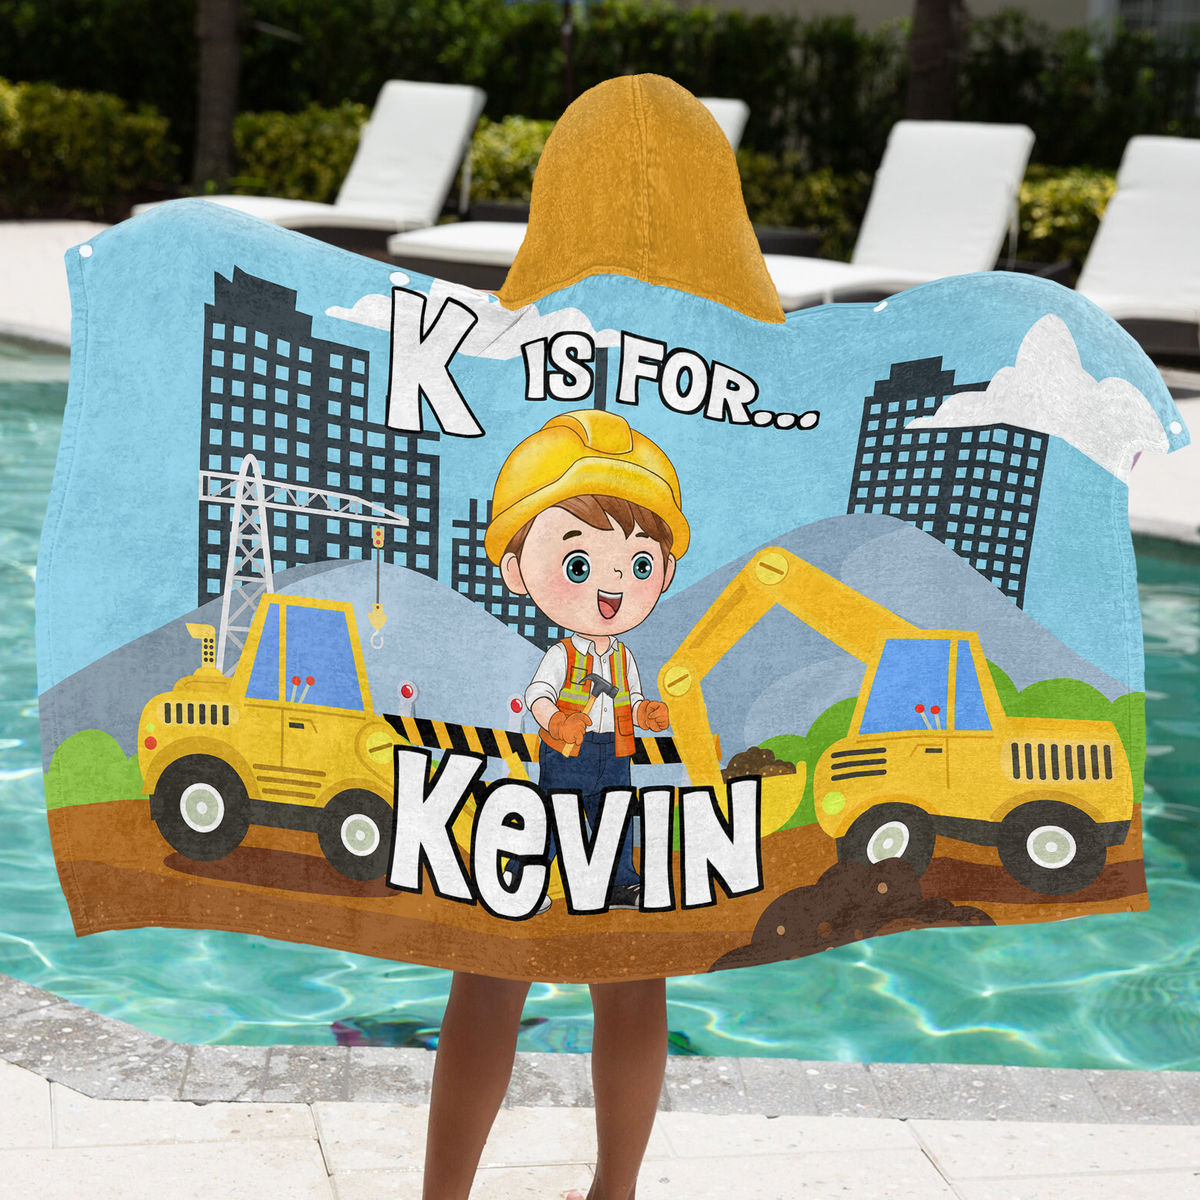 Hooded Towel - Beach Bath Towel with Hood For Kids - Custom Engineer For Boy - Birthday Gifts for Toddler, Gifts For Kids - Personalized Towel_5